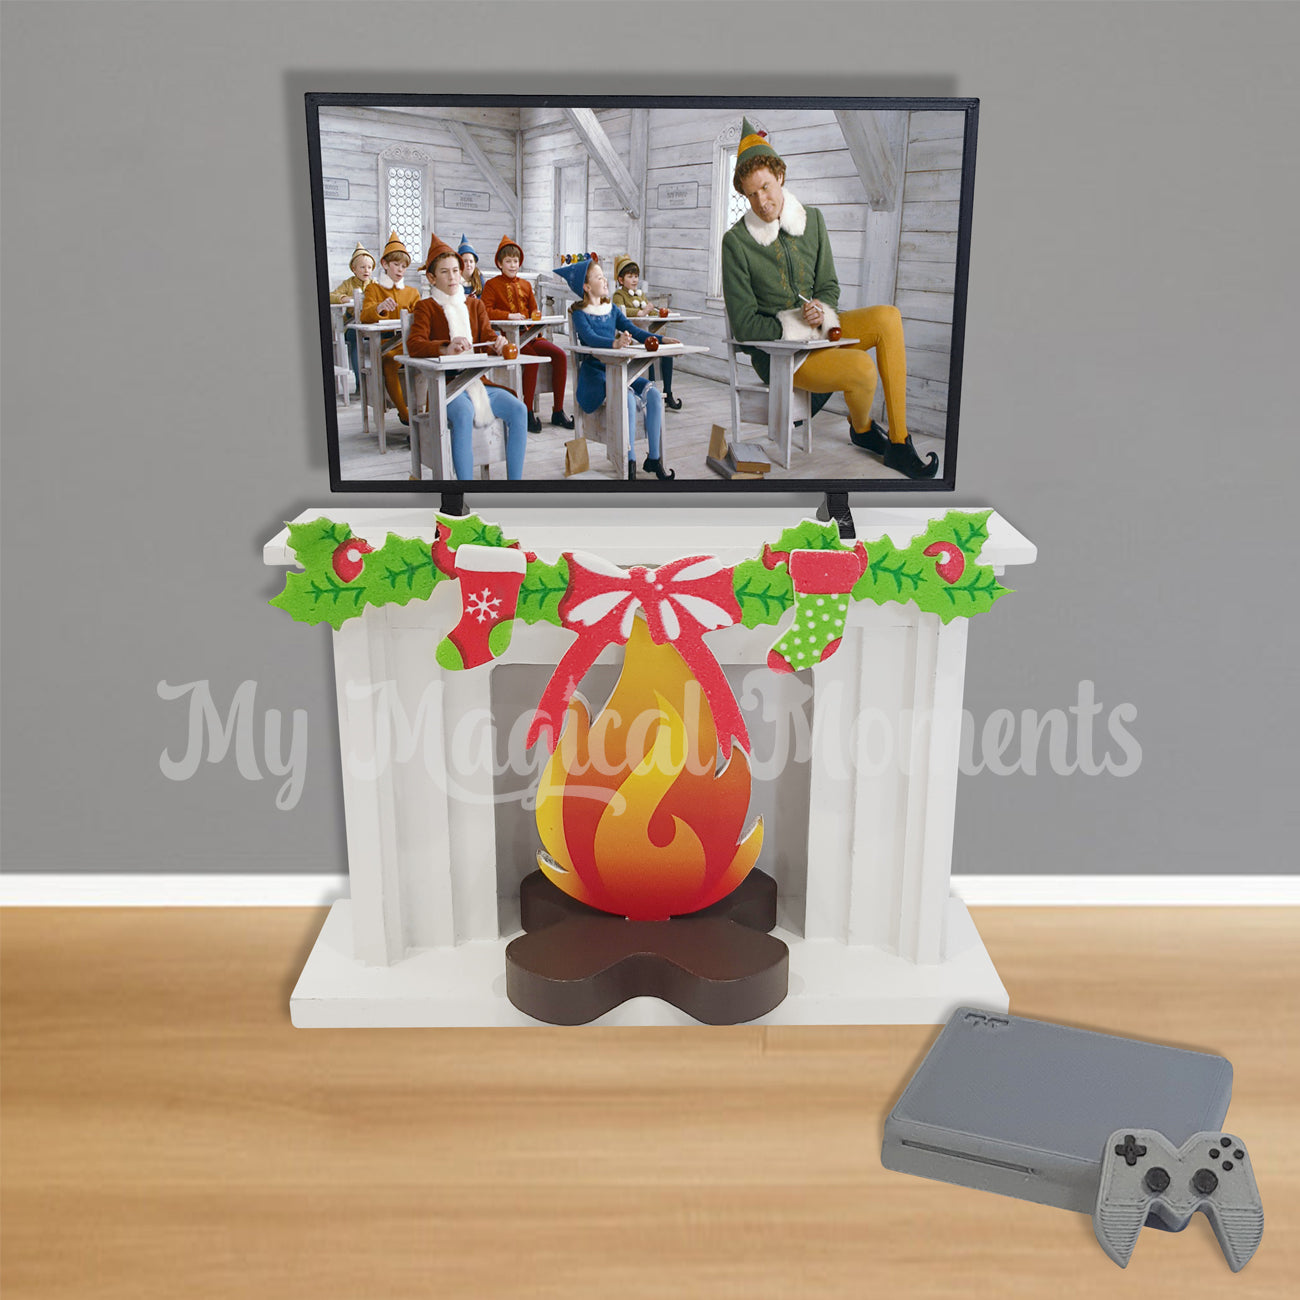 Elf movie printable for elf sized tv with gaming set